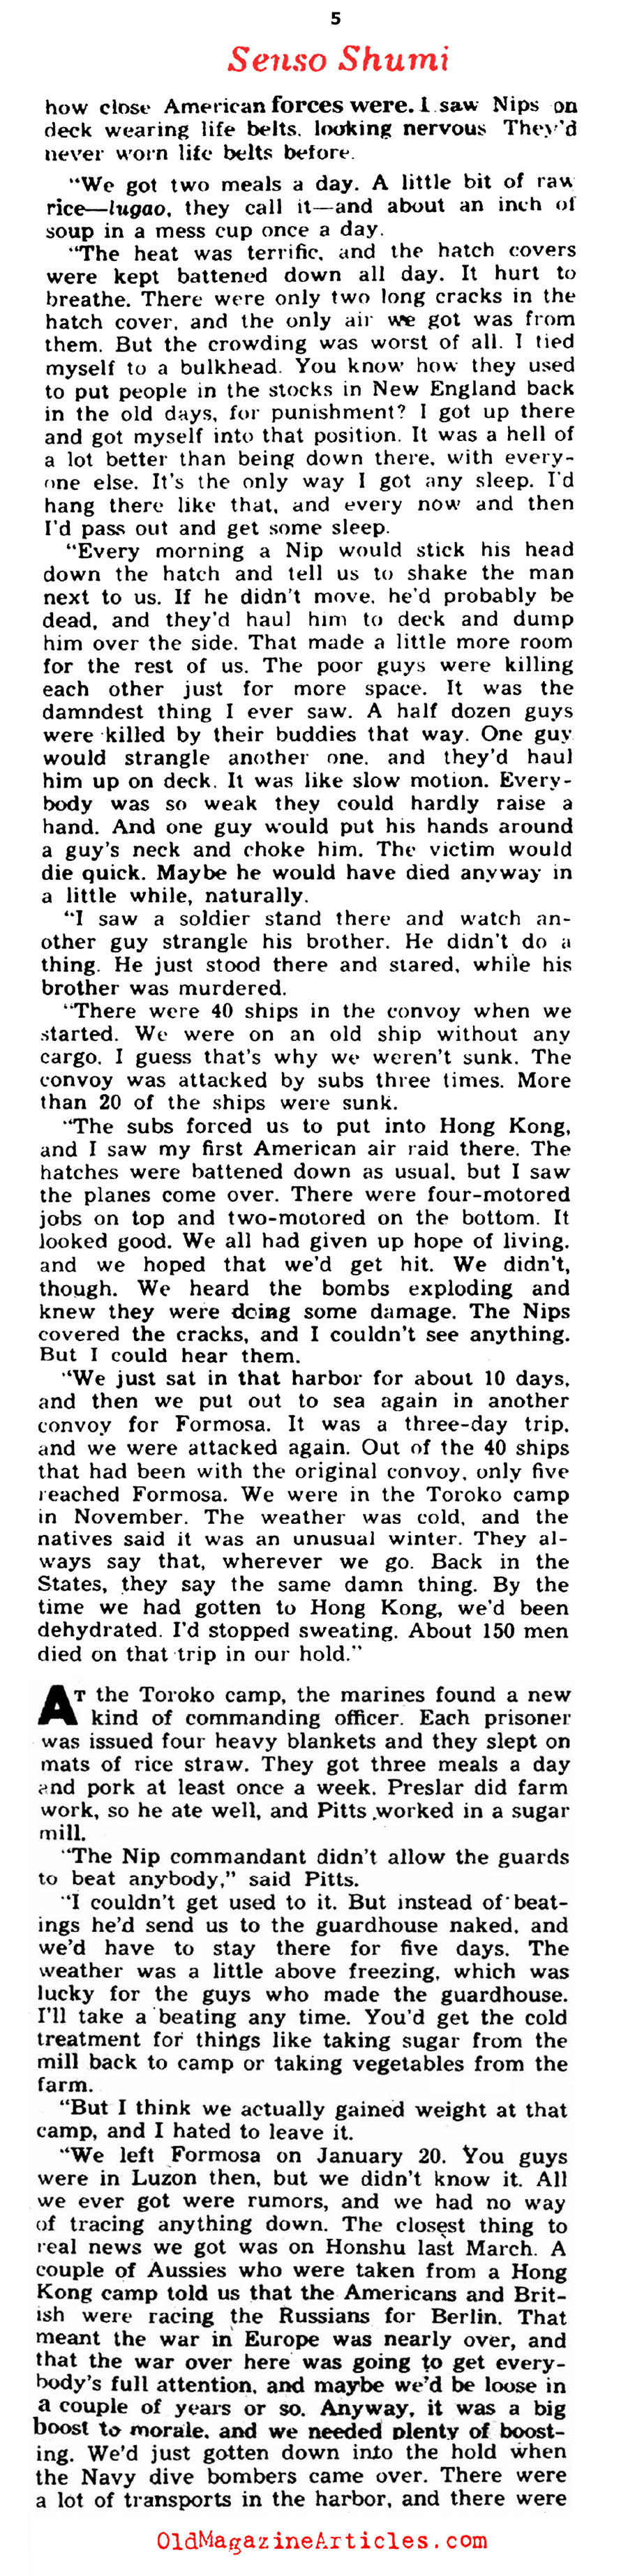 Americans Tell of Japanese Prison Camps (Yank Magazine, 1945)